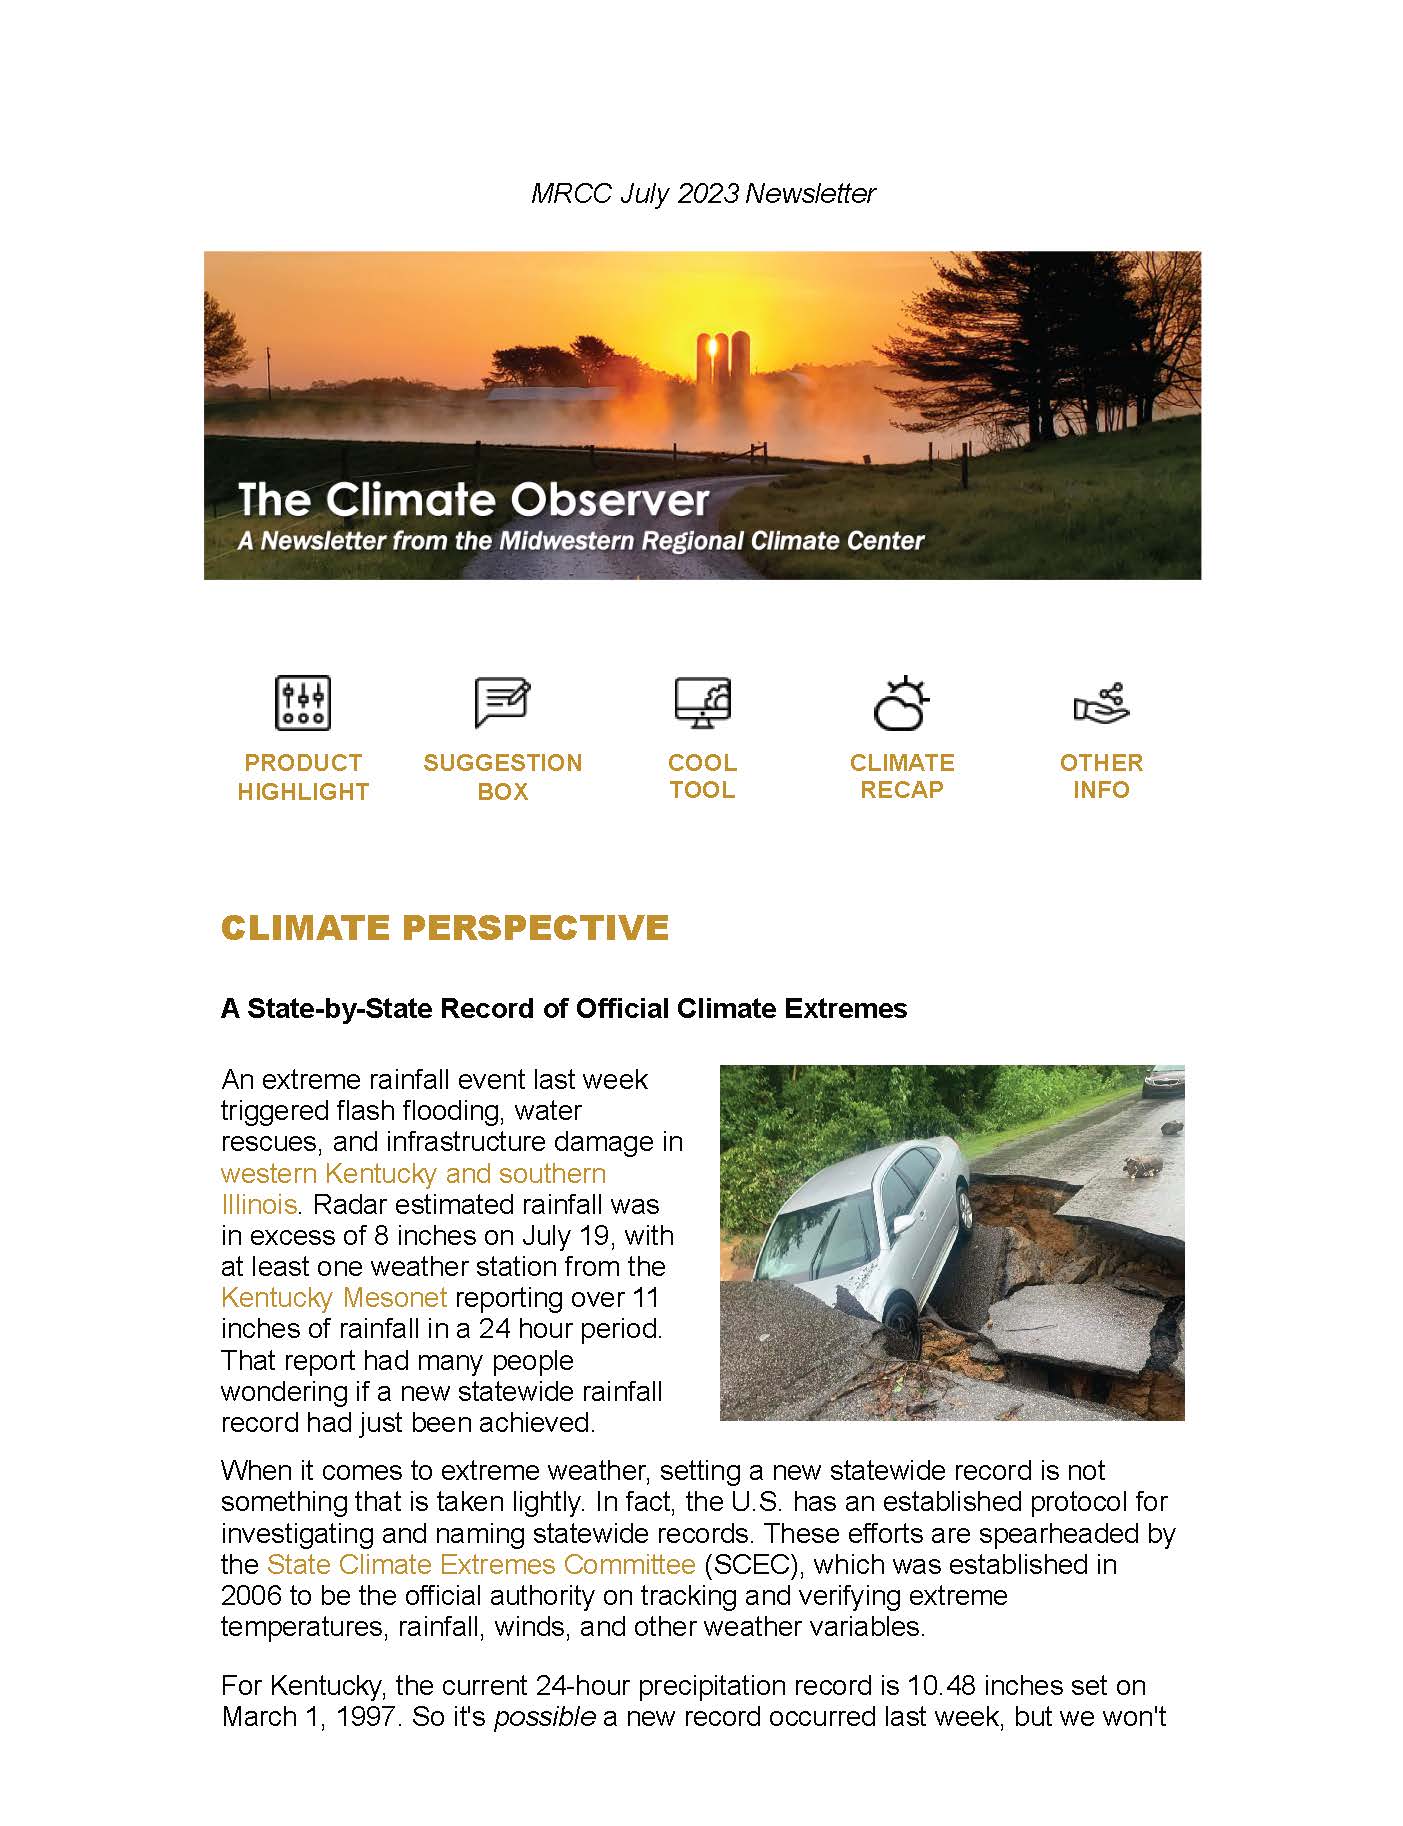 July 2023 "The Climate Observer"